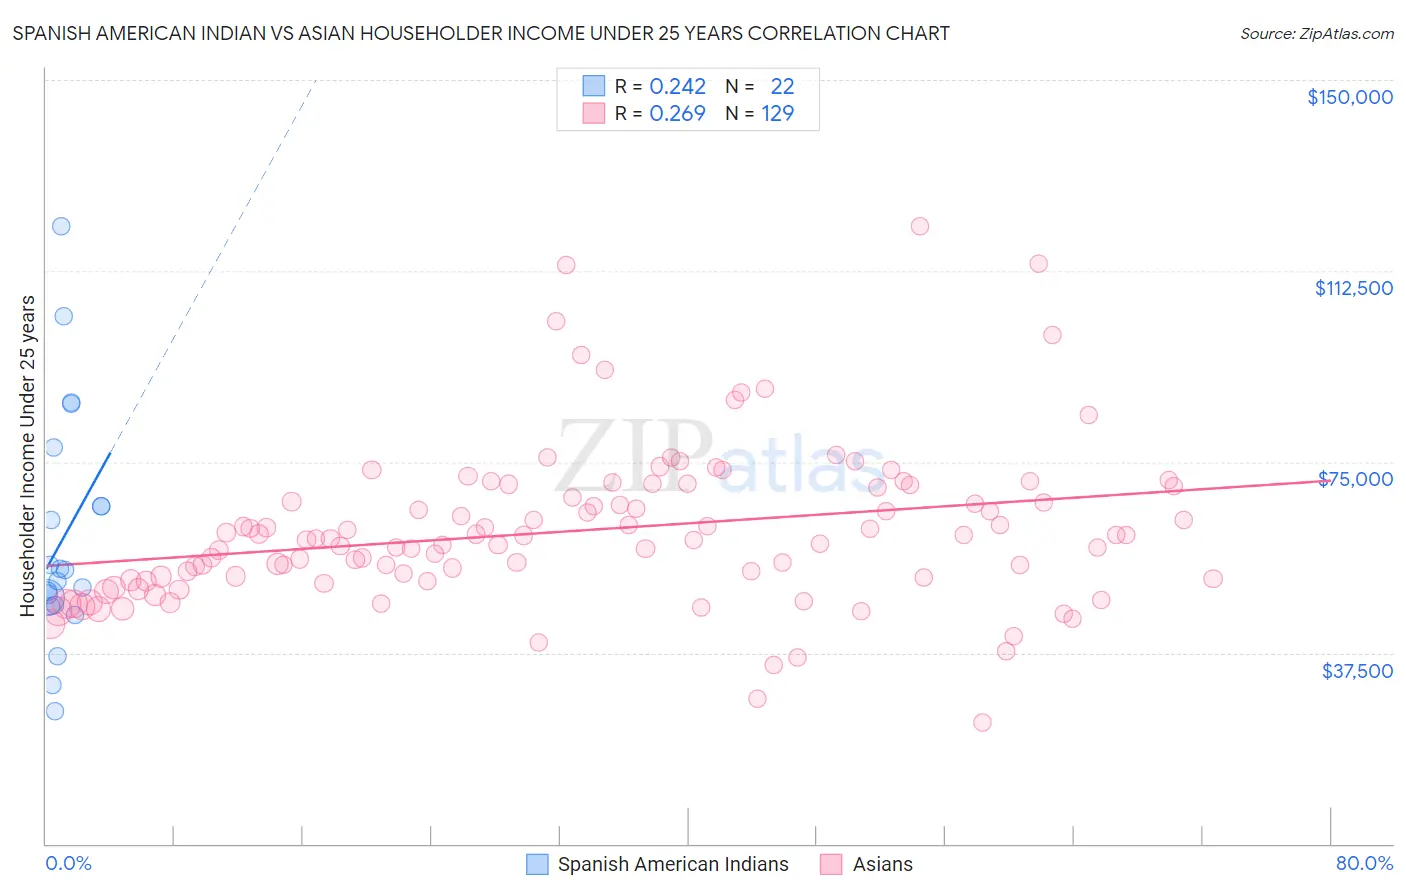 Spanish American Indian vs Asian Householder Income Under 25 years